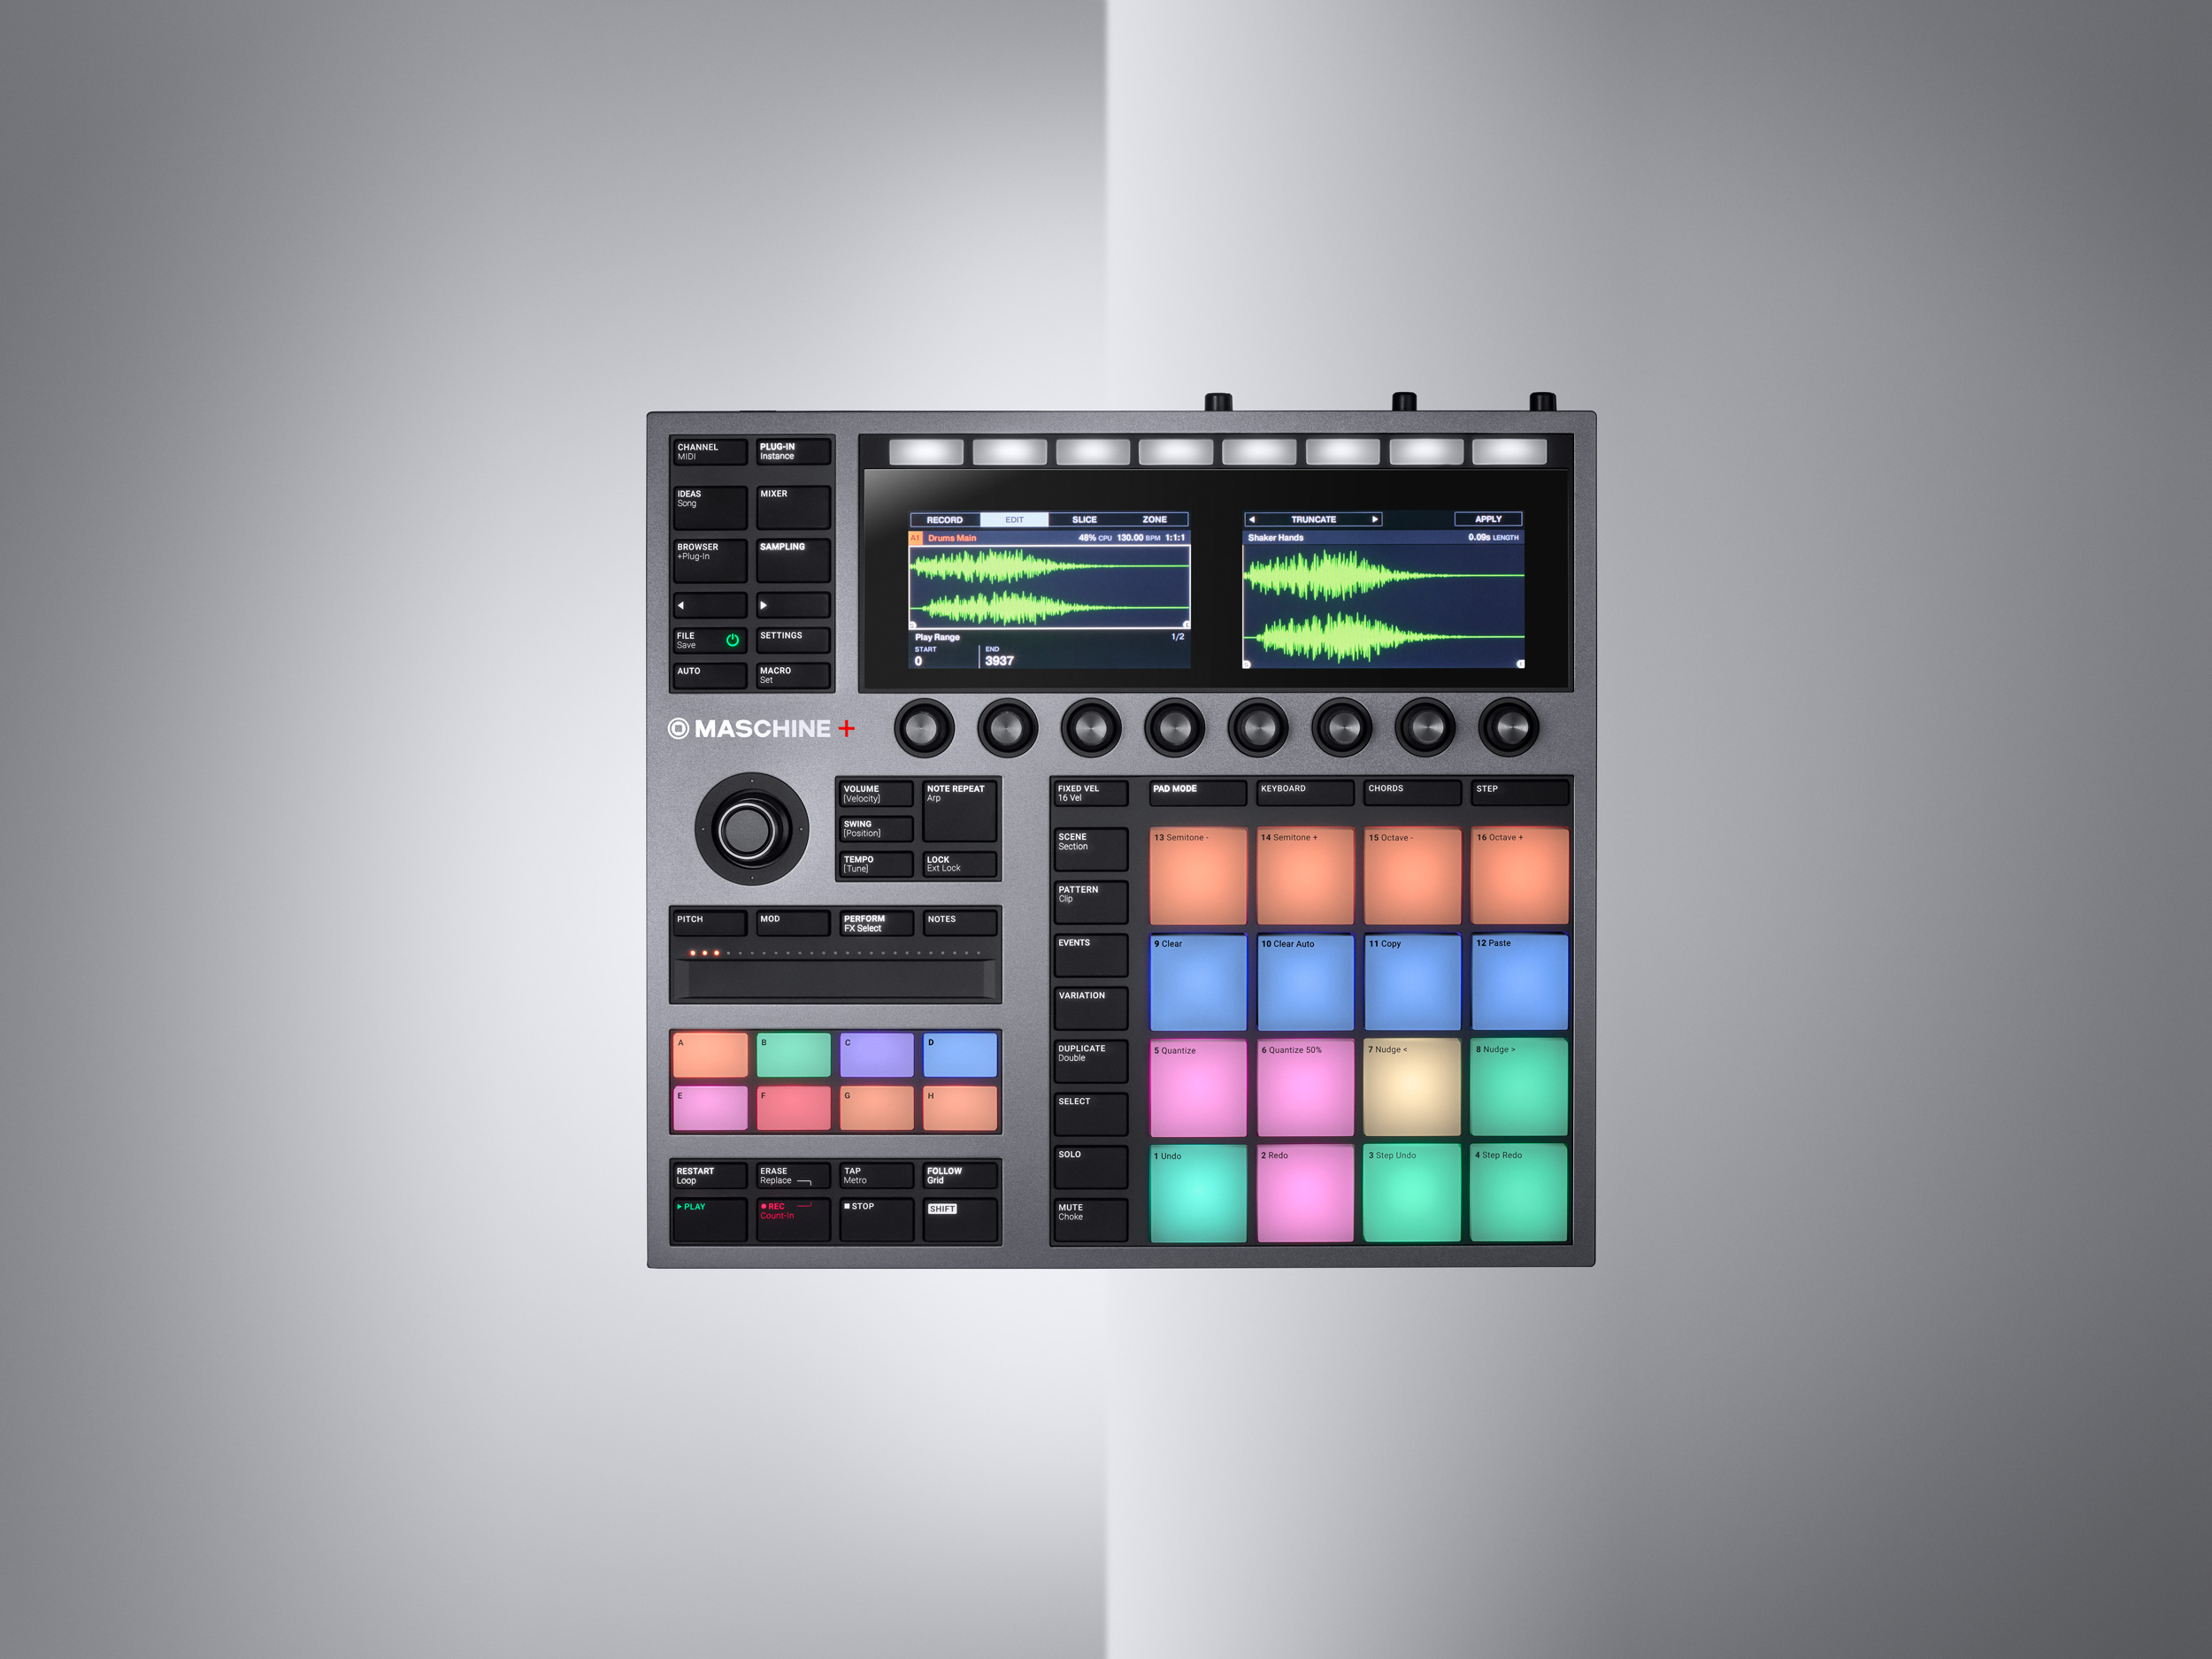 native instruments maschine review